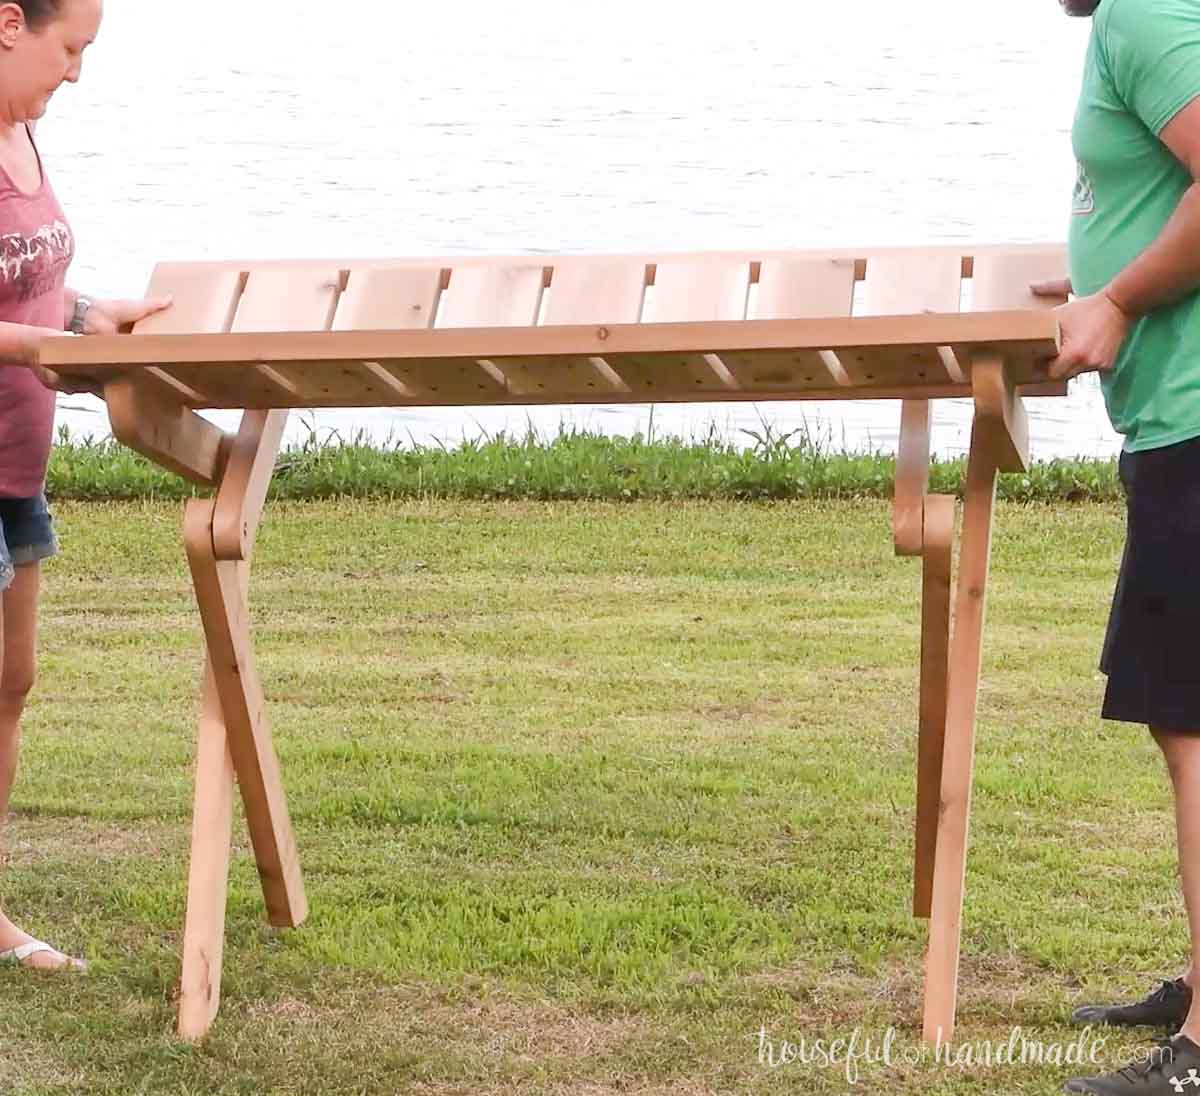 Two people folding down the picnic table.